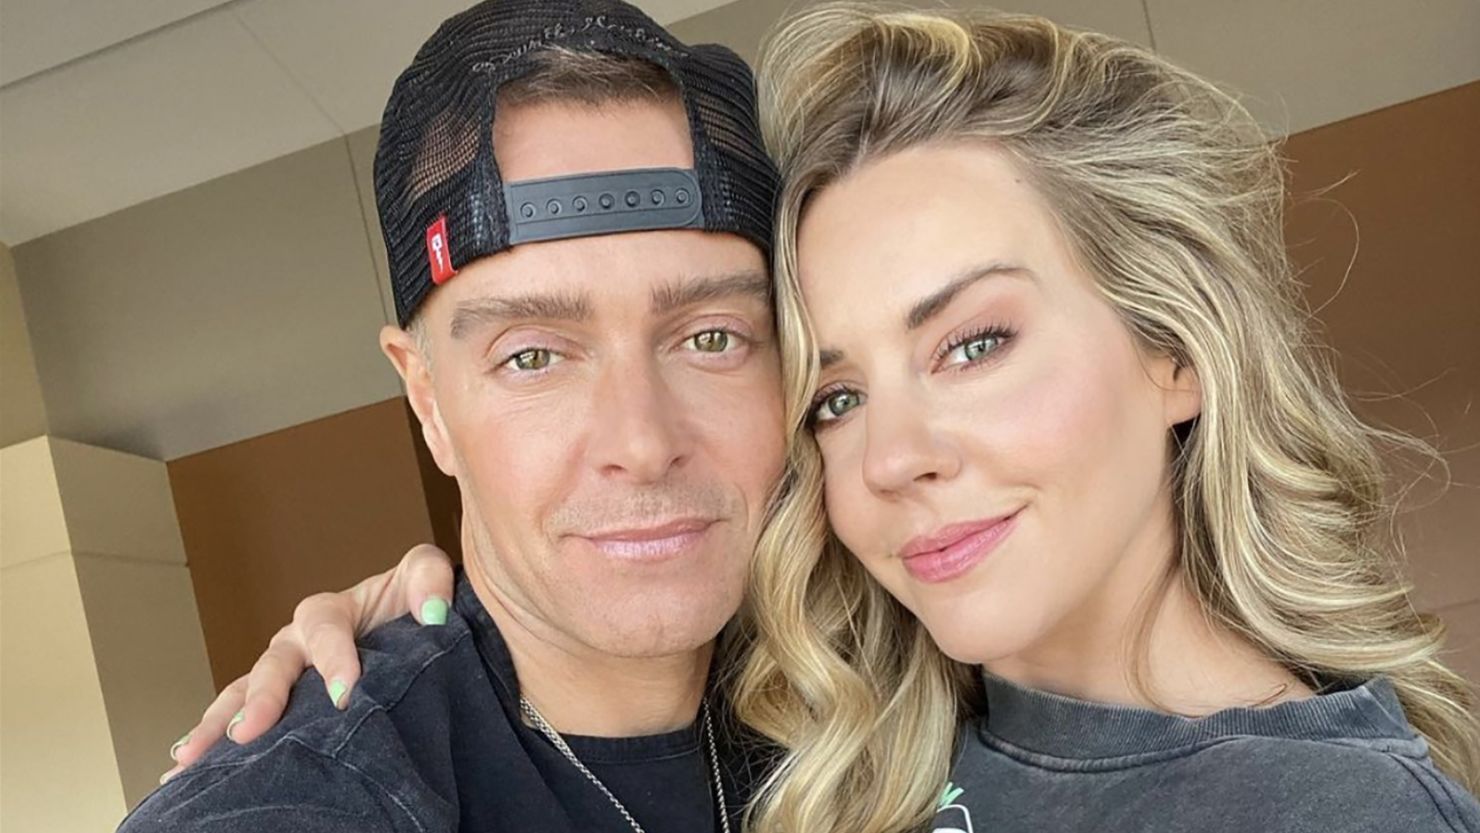 Joey Lawrence and Samantha Cope are now married.